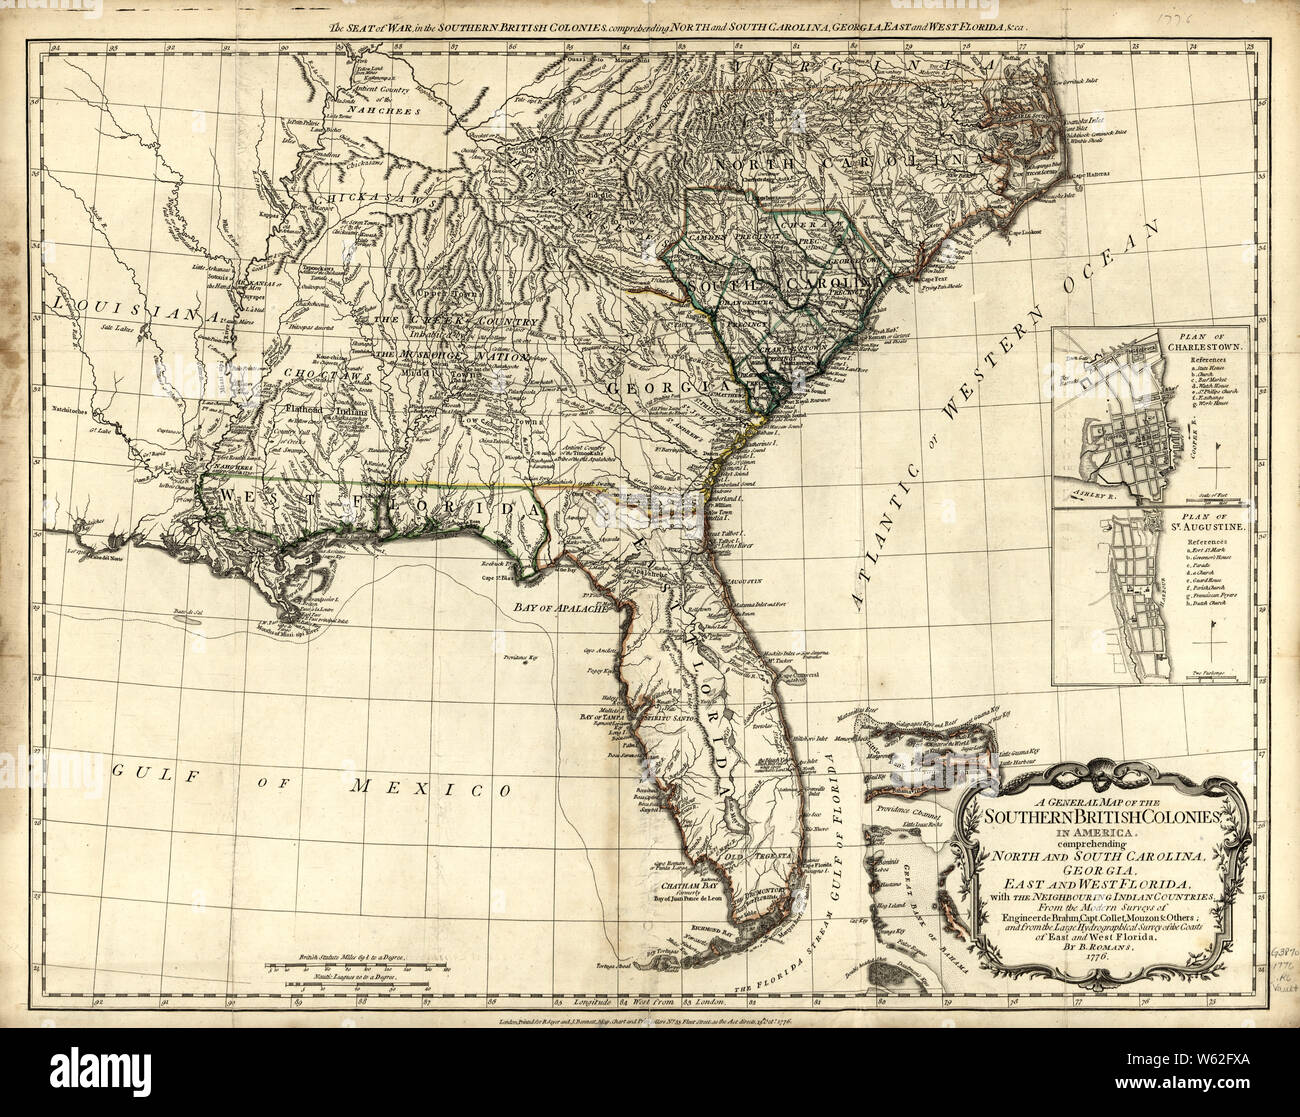 American Revolutionary War Era Maps 1750-1786 048 A general map of the middle British colonies in America 16 Rebuild and Repair Stock Photo